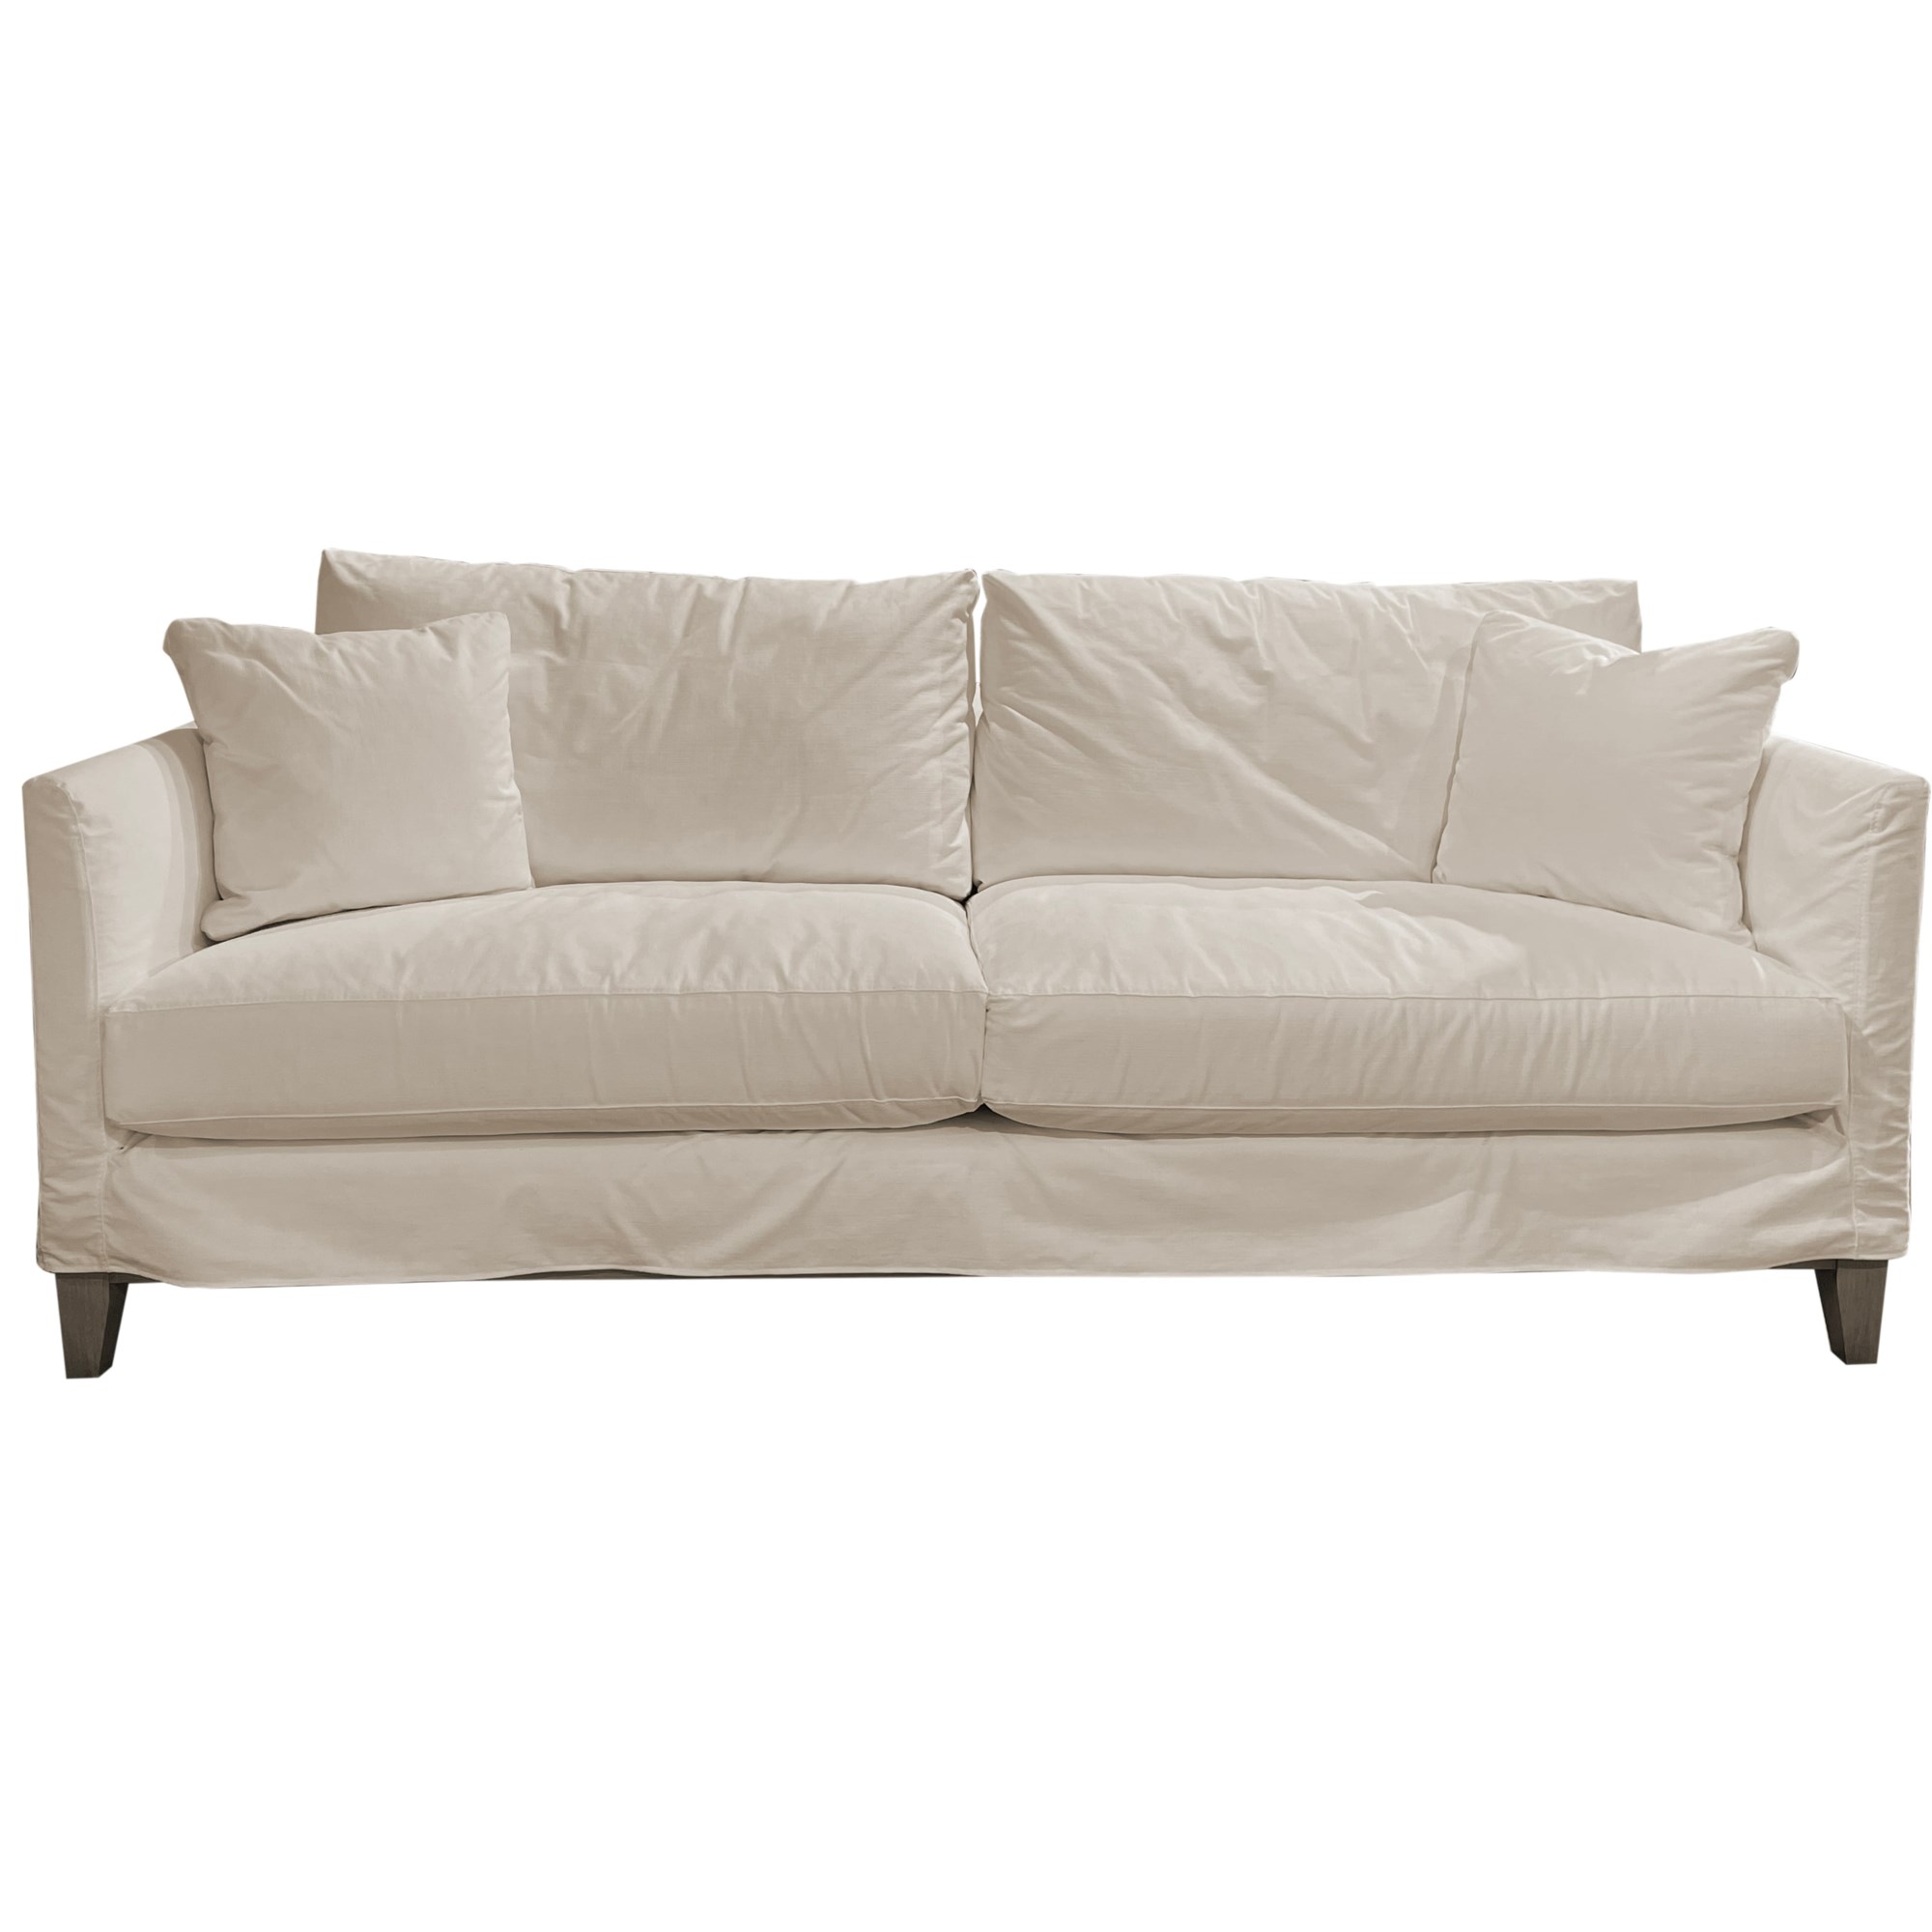 Tailored Slipcover for Loveseat with Attached Back – The Slipcover Maker